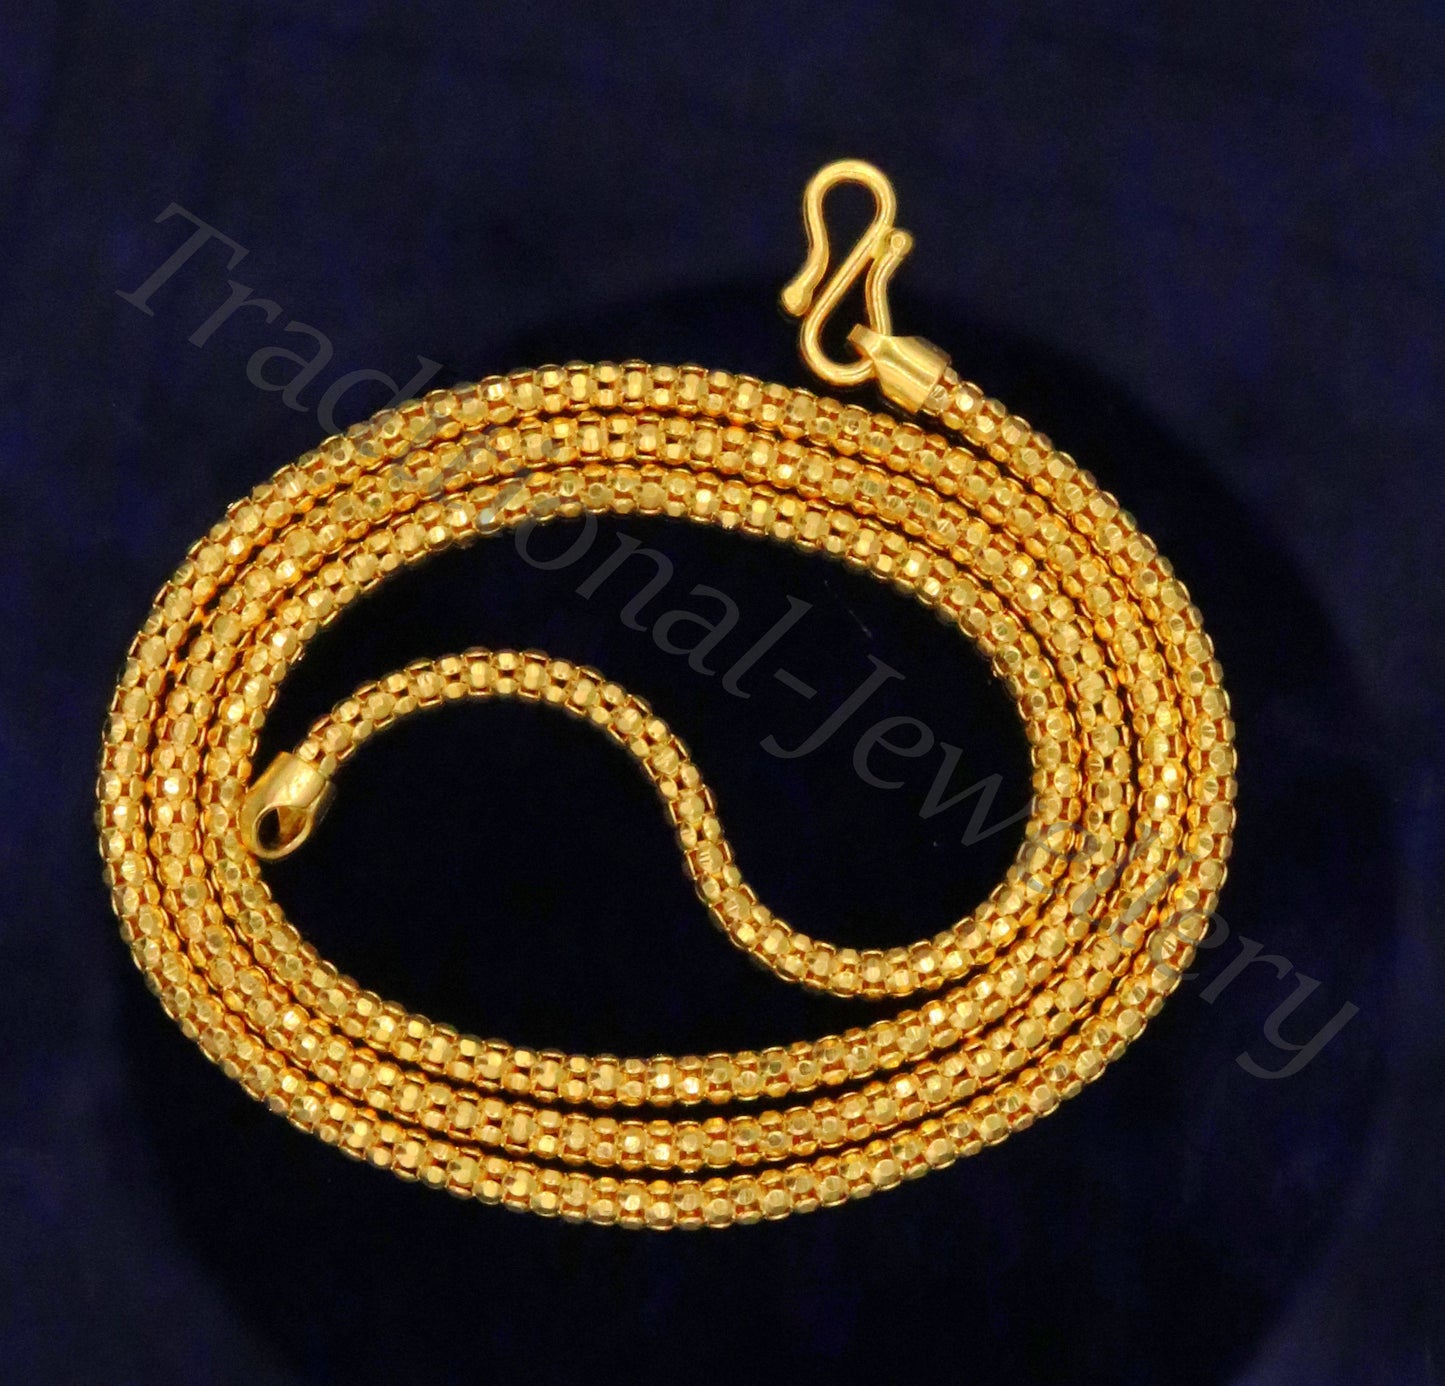 22kt yellow gold handmade unique design chain 20 inches unisex chain necklace from Rajasthan India. - TRIBAL ORNAMENTS